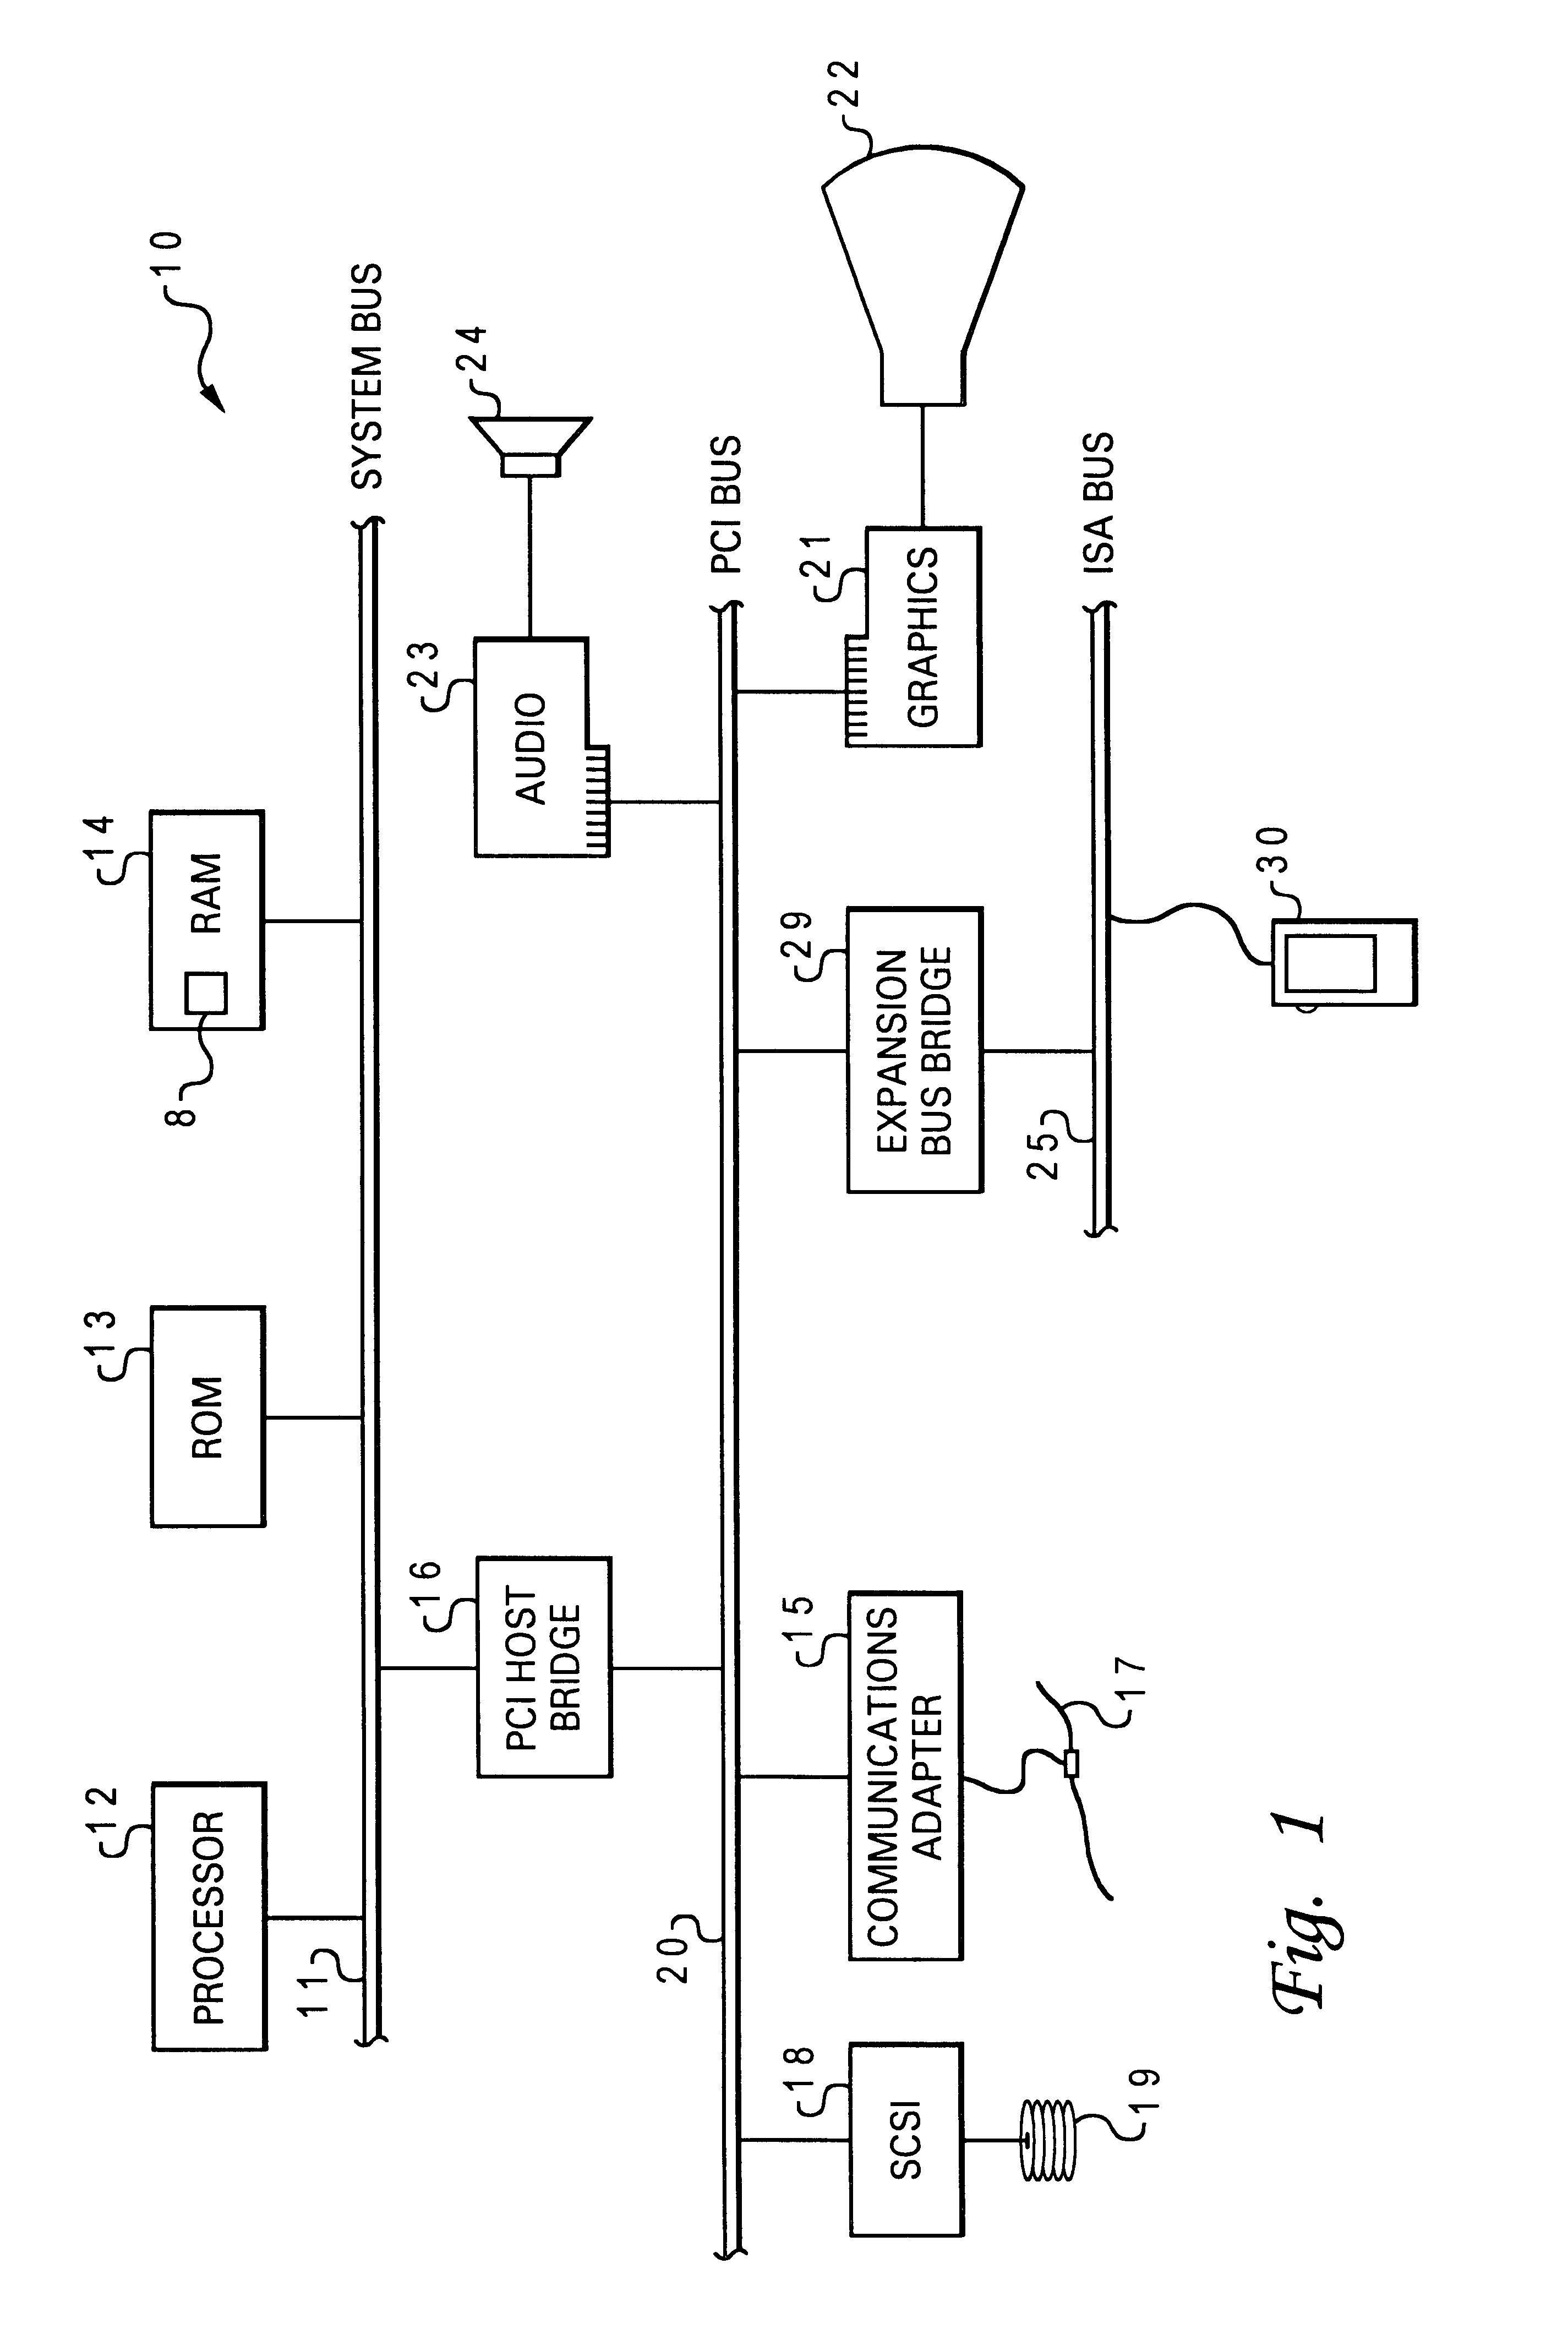 Method, system and program for topographical interfacing